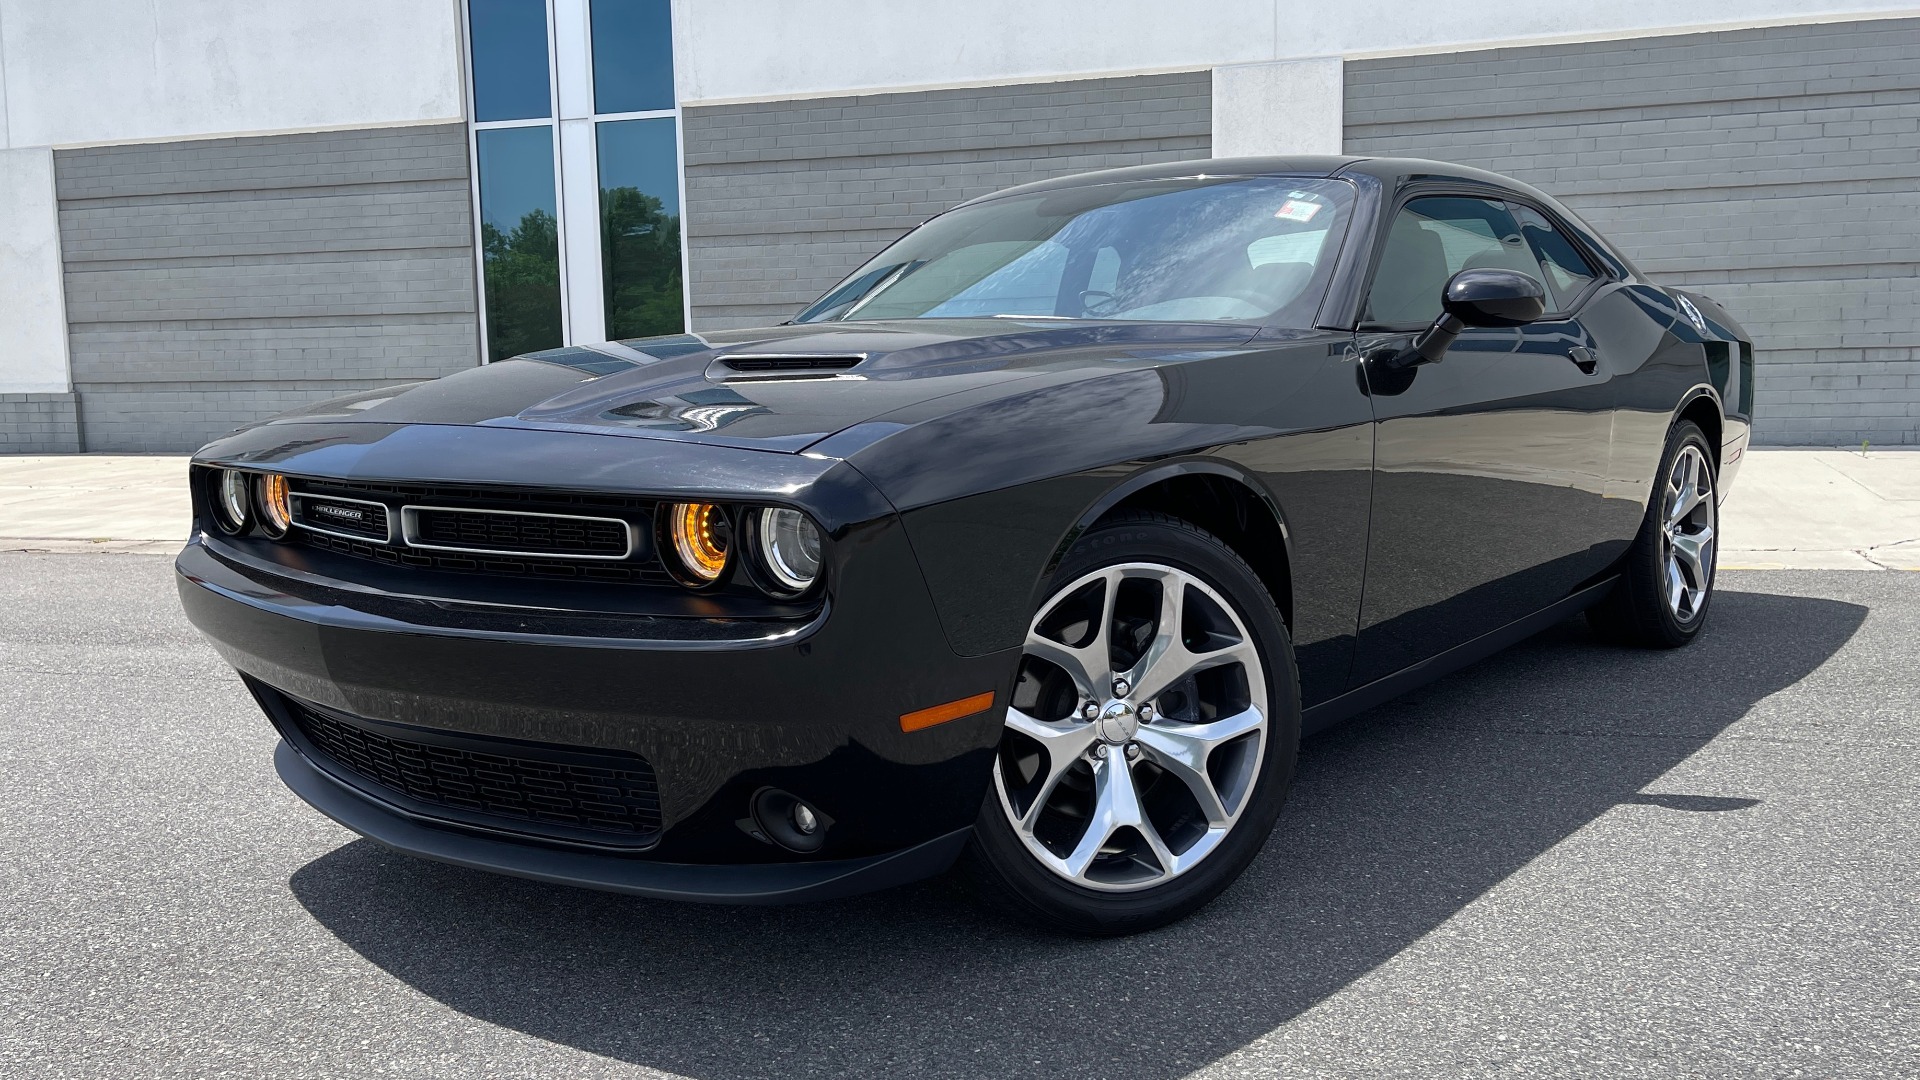 Used 2015 Dodge CHALLENGER SXT PLUS COUPE / 3.6L V6 / 8-SPD AUTO / NAV / ALPINE / SUNROOF / REARVIEW for sale Sold at Formula Imports in Charlotte NC 28227 1